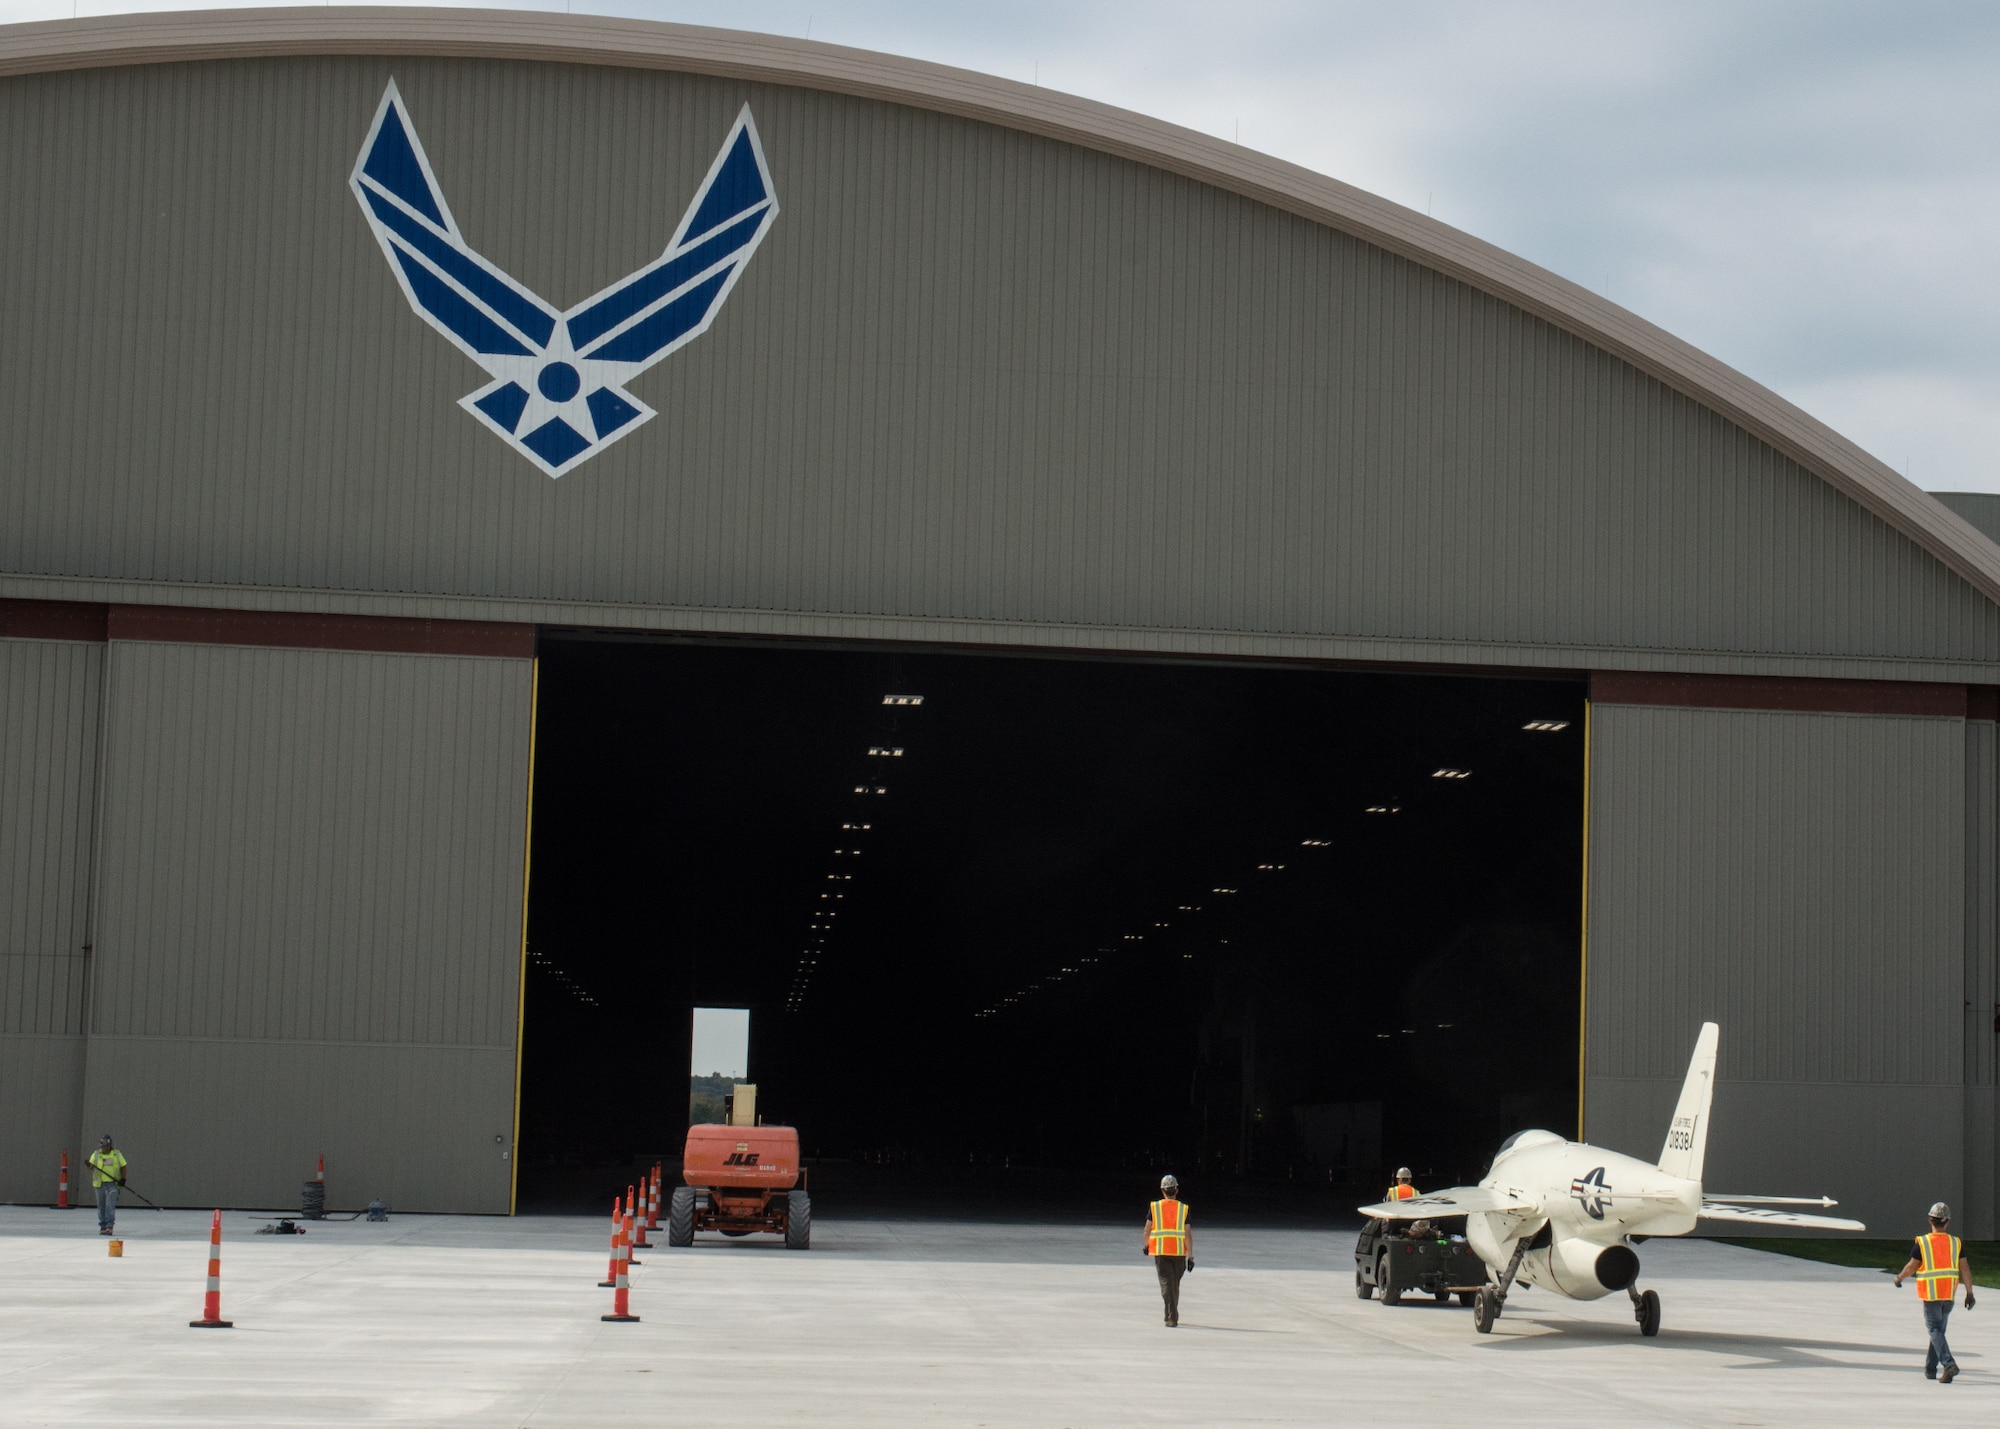 Restoration staff move the Bell X-5 into the new fourth building at the National Museum of the U.S. Air Force on Oct. 8, 2015. (U.S. Air Force photo by Ken LaRock)